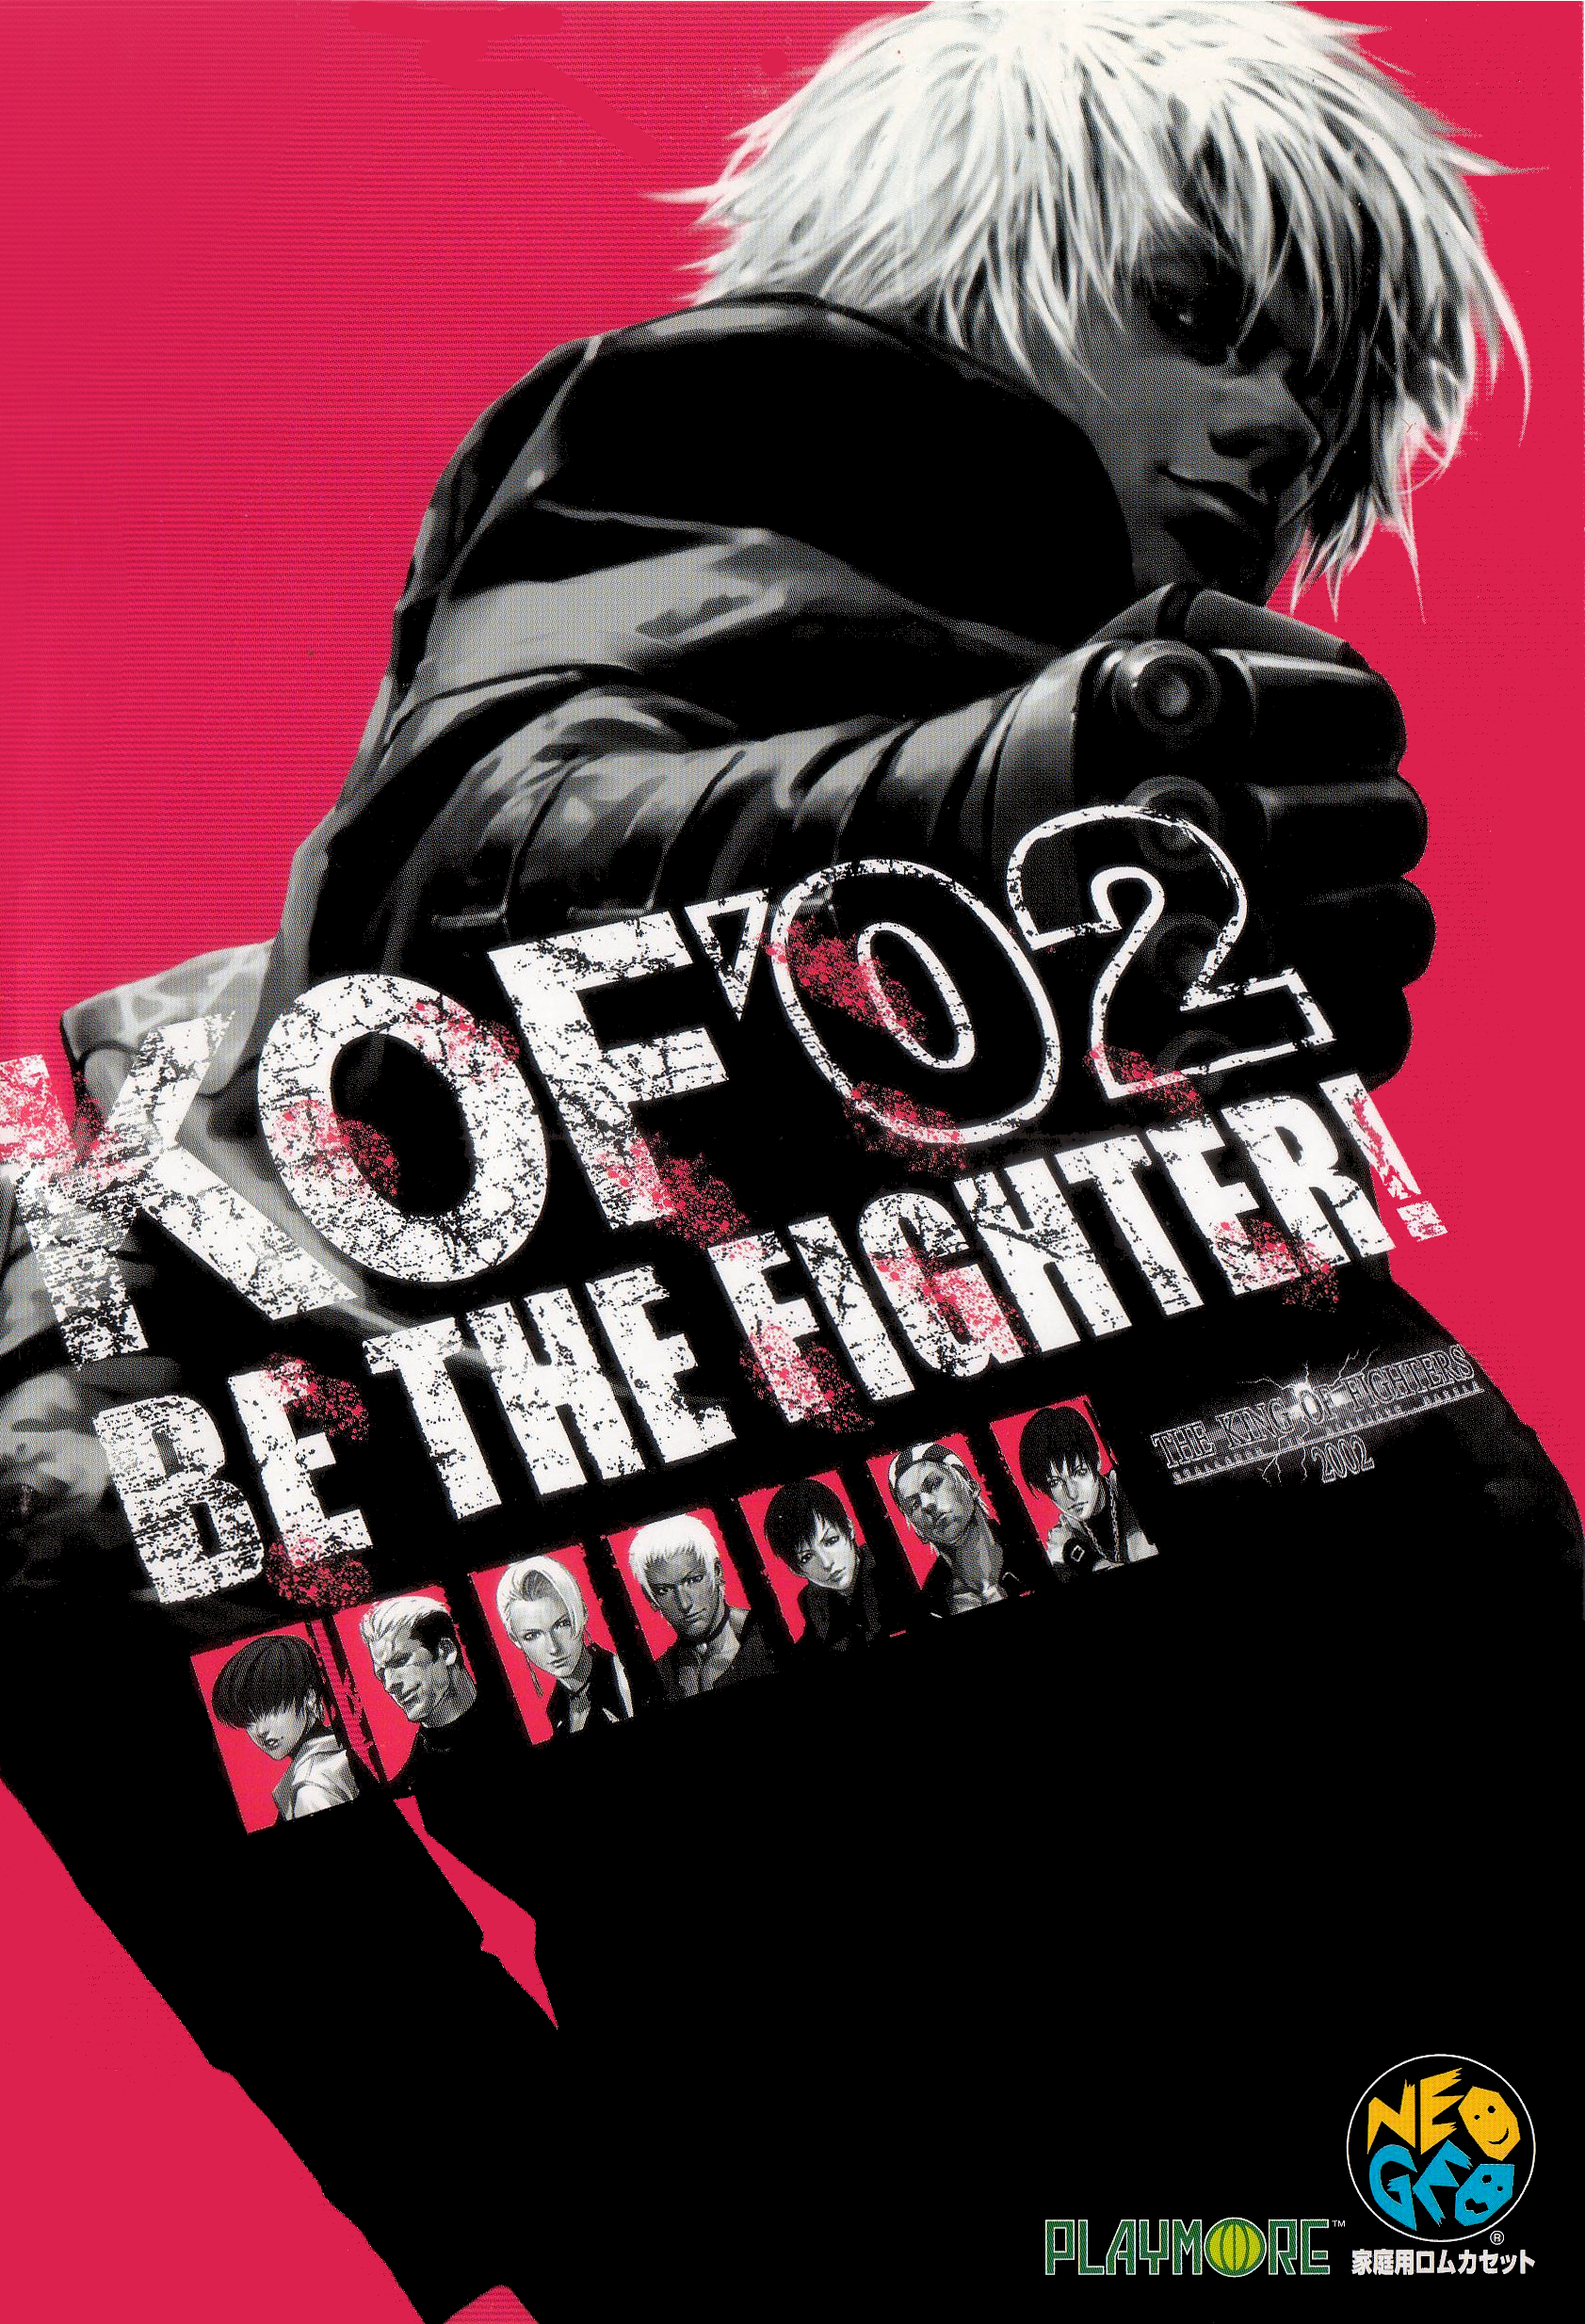 neo geo the king of fighters 97